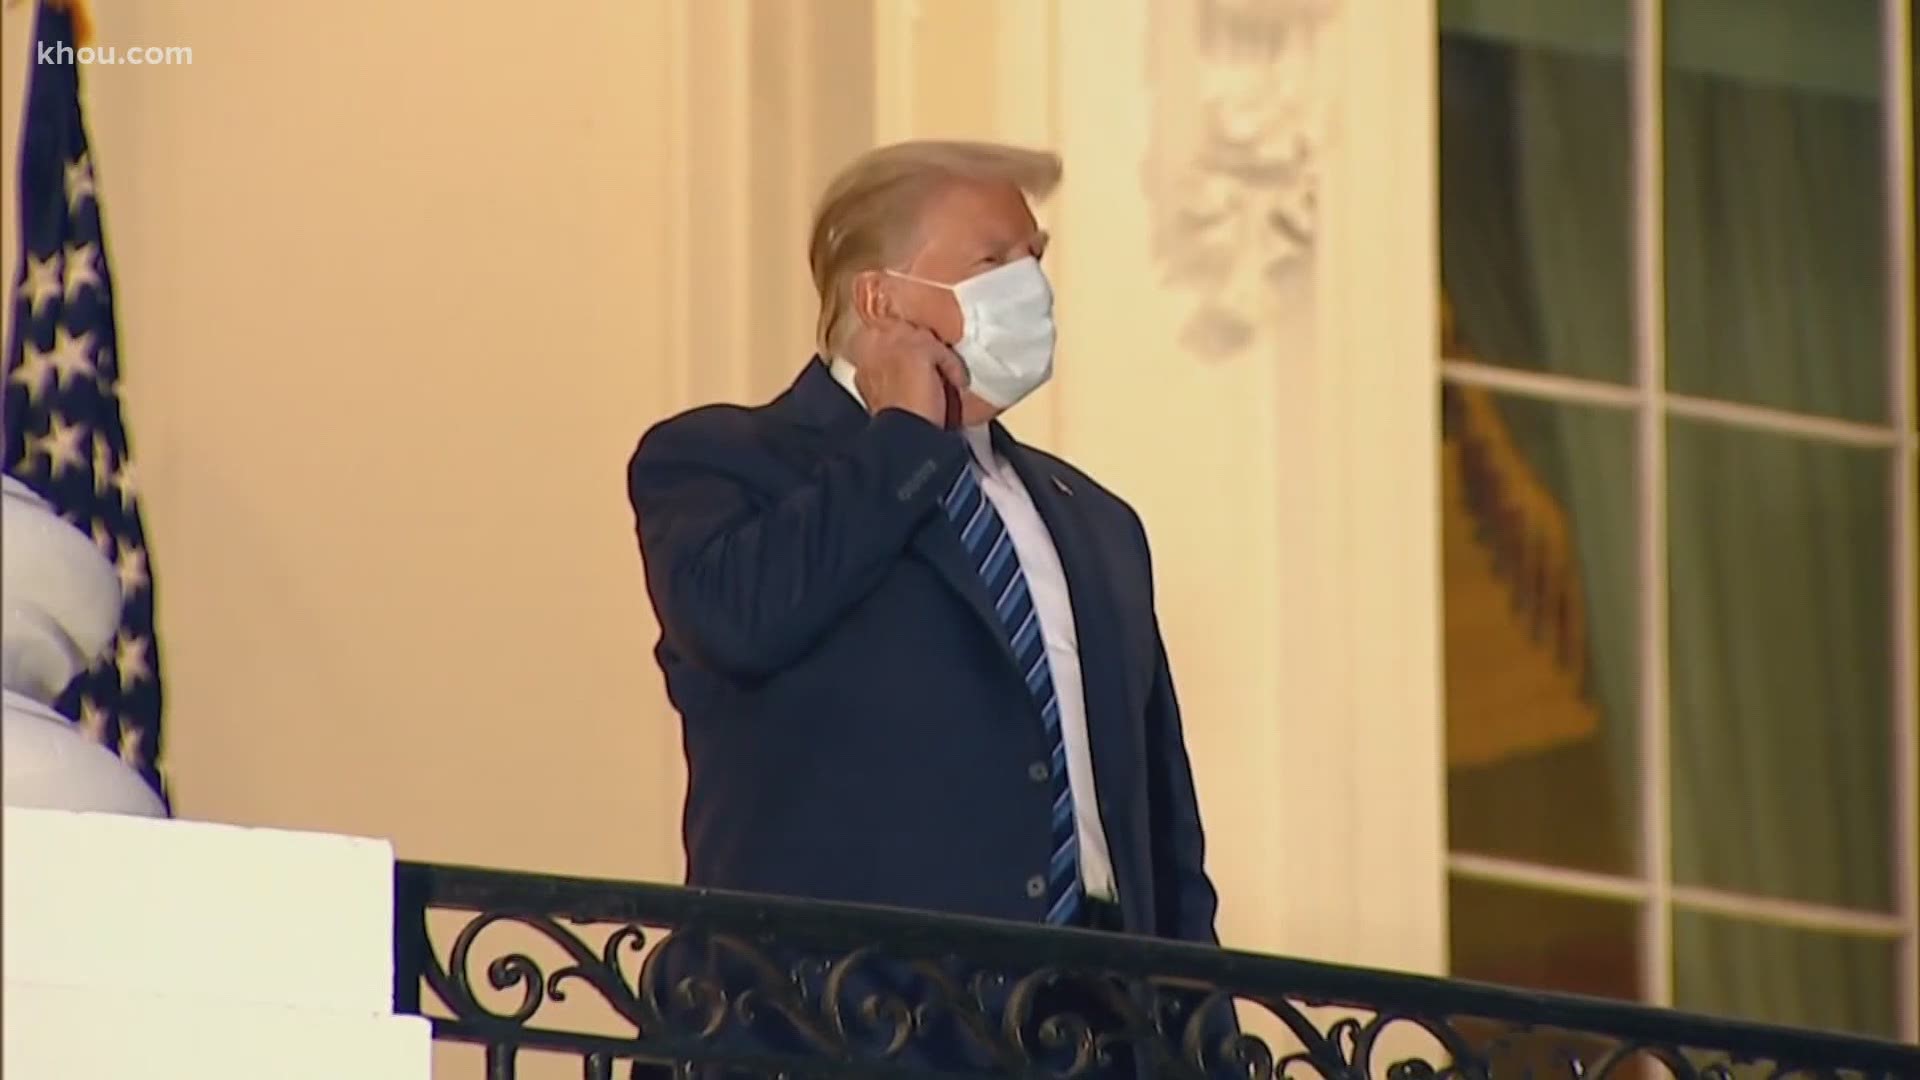 President Donald Trump returned to the White House still infected with COVID-19 and removed his mask for a photo opportunity shortly after.